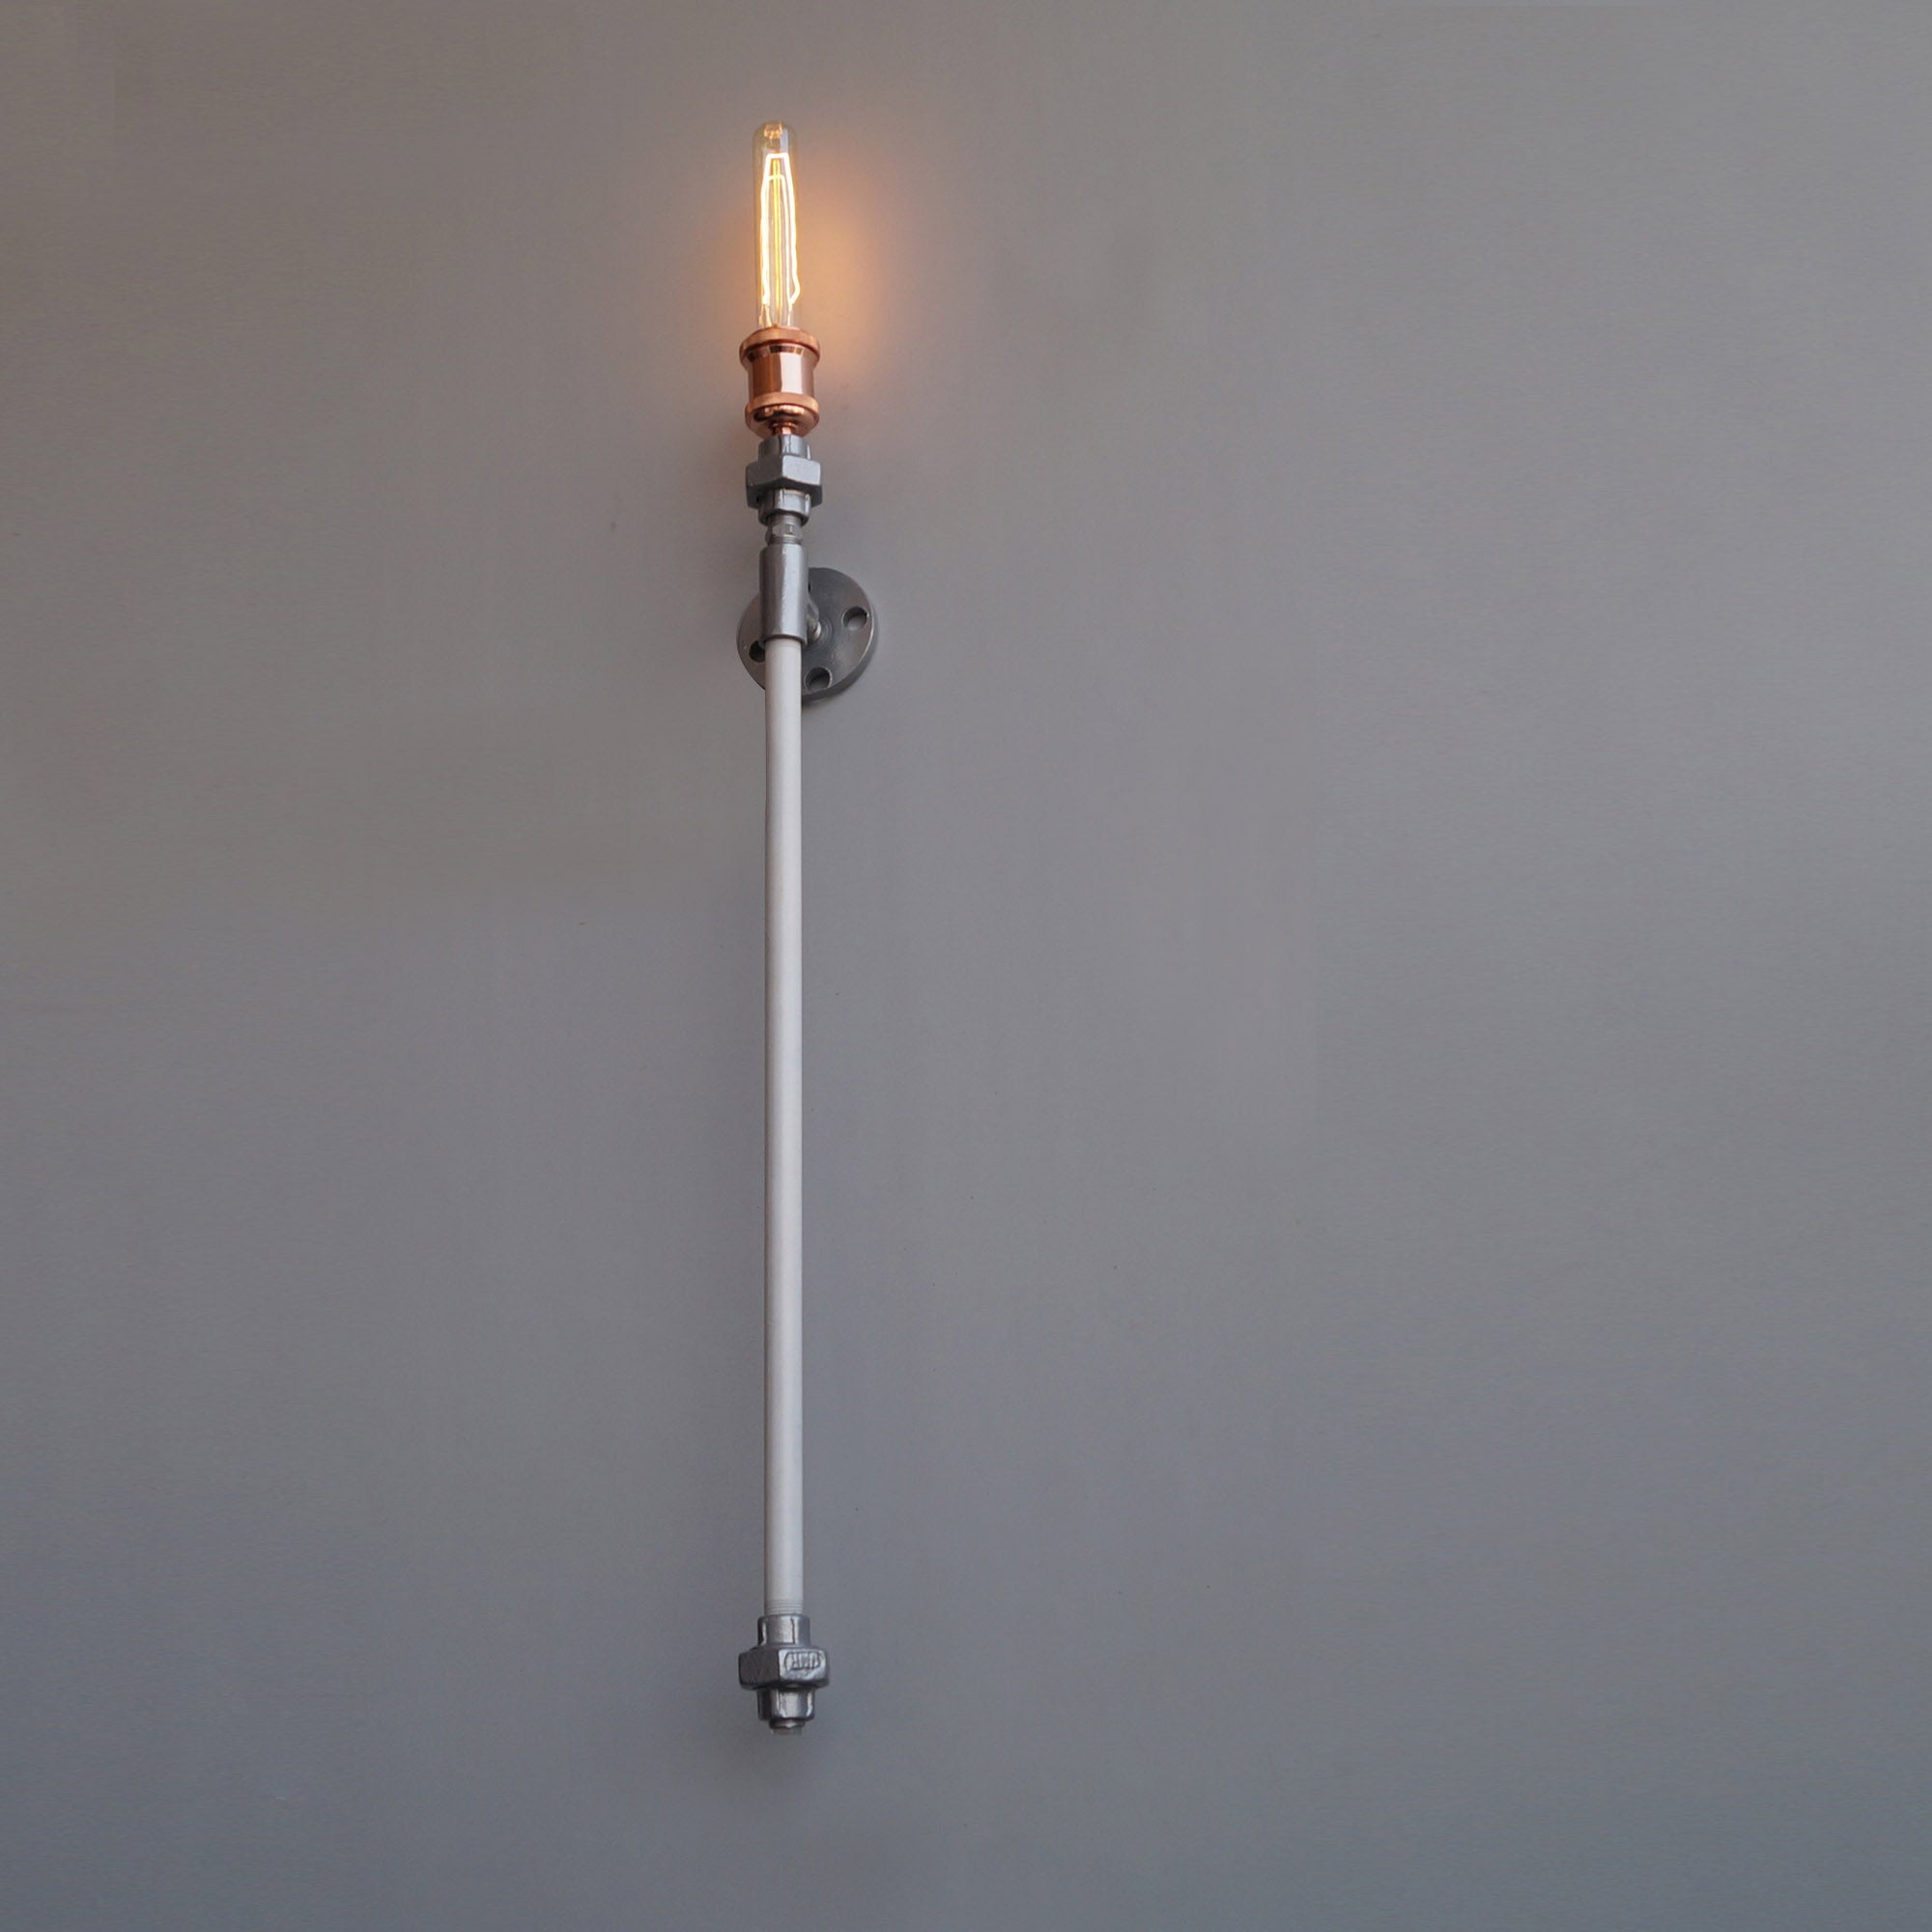 Tpf128 Industrial Pipe Decorative Wall Light